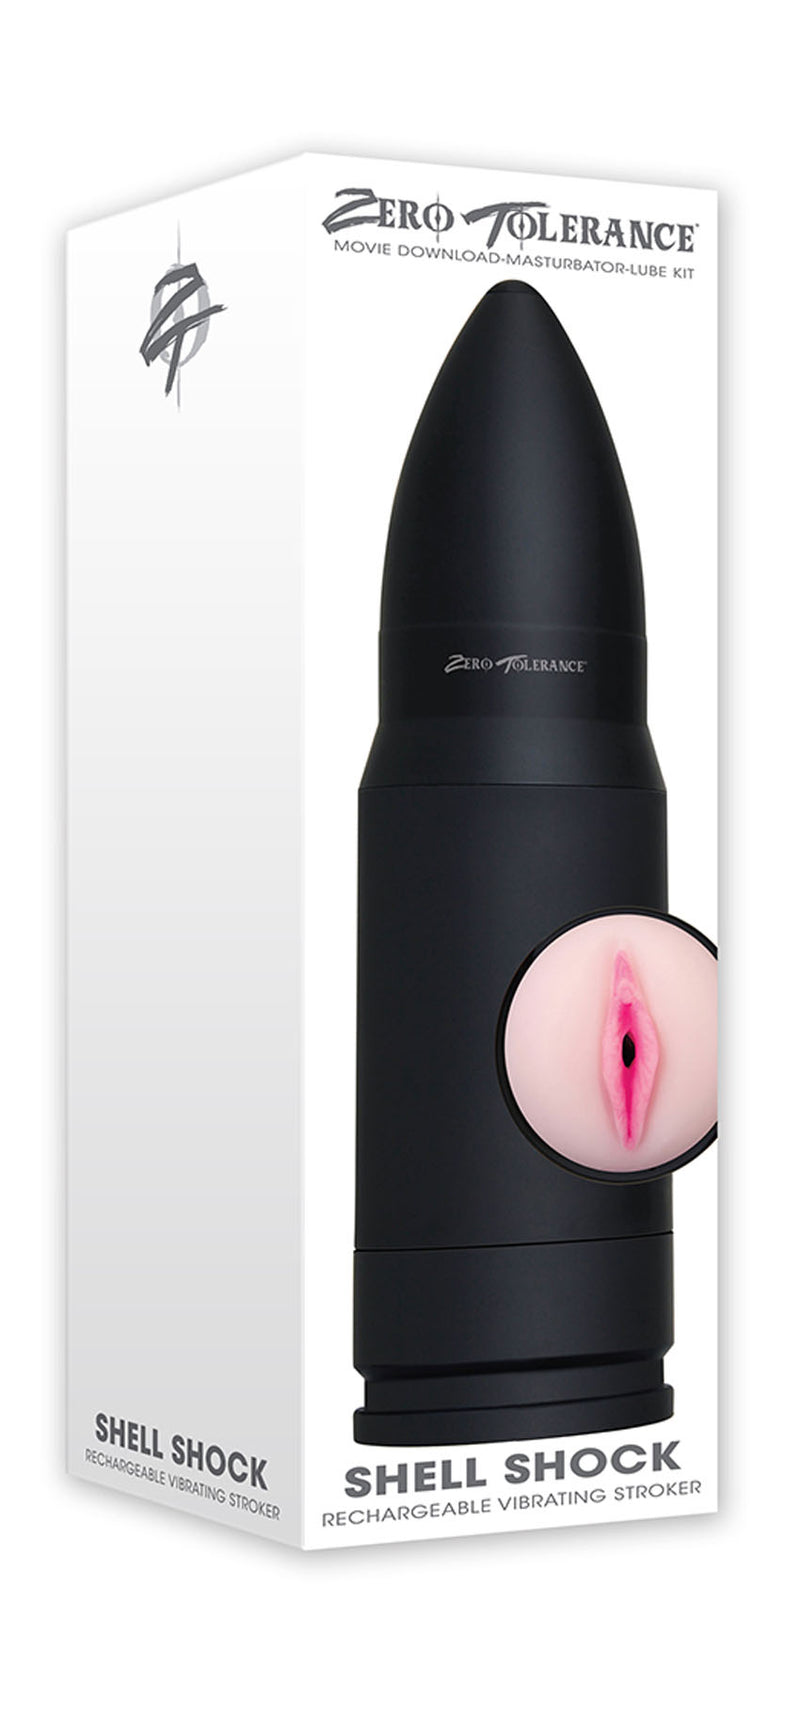 Upgrade Your Solo Sessions with the Ammo-Grip Stroker - Realistic, Multi-Function, and Submersible for Explosive Pleasure!